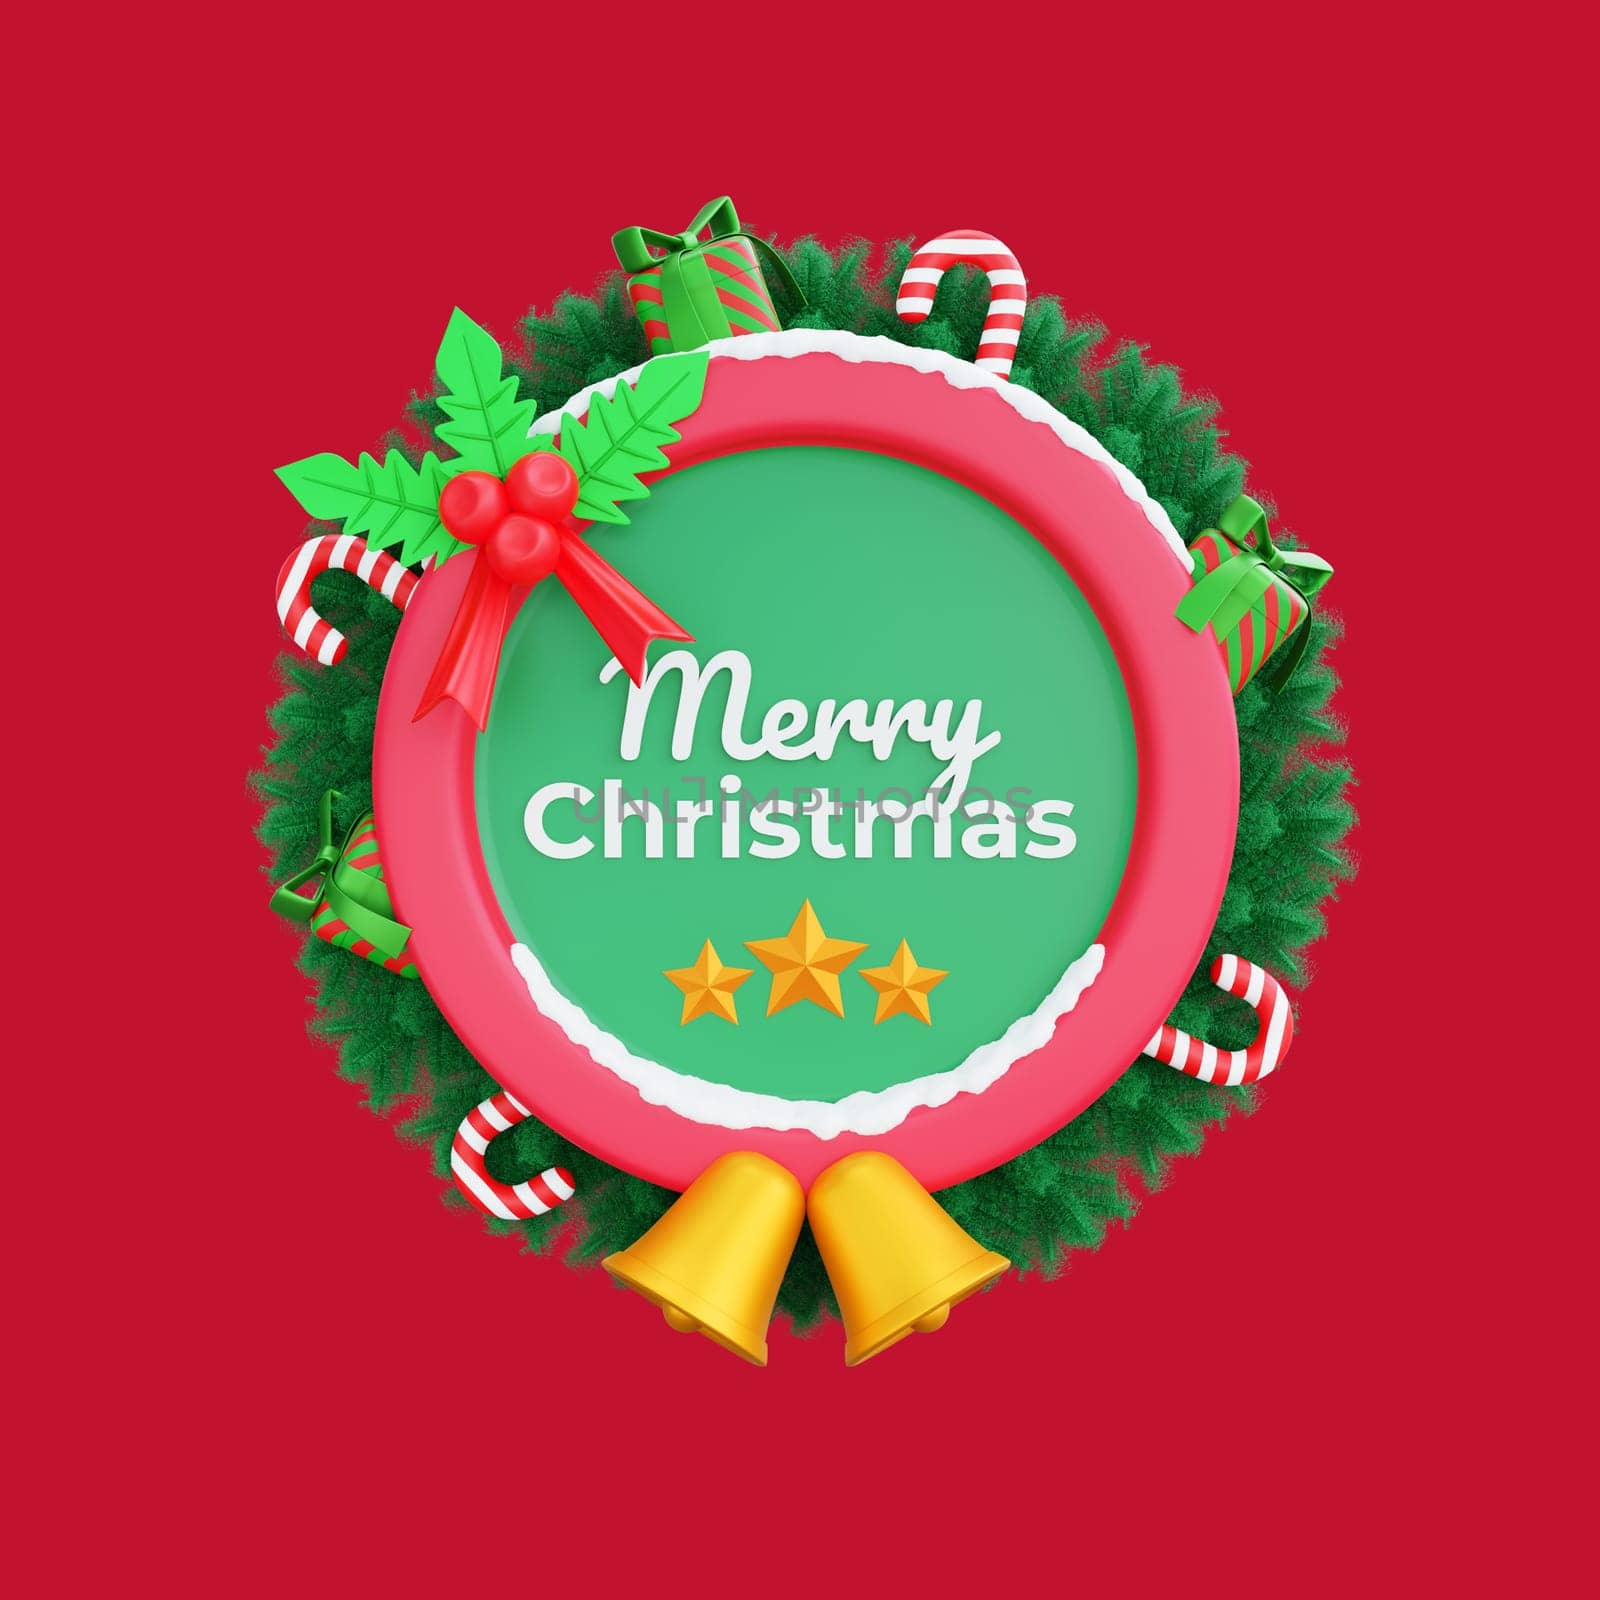 3D illustration of a festive Christmas wreath adorned with gold bells and candy canes, featuring the message Merry Christmas. Perfect for Christmas and Happy New Year celebrations